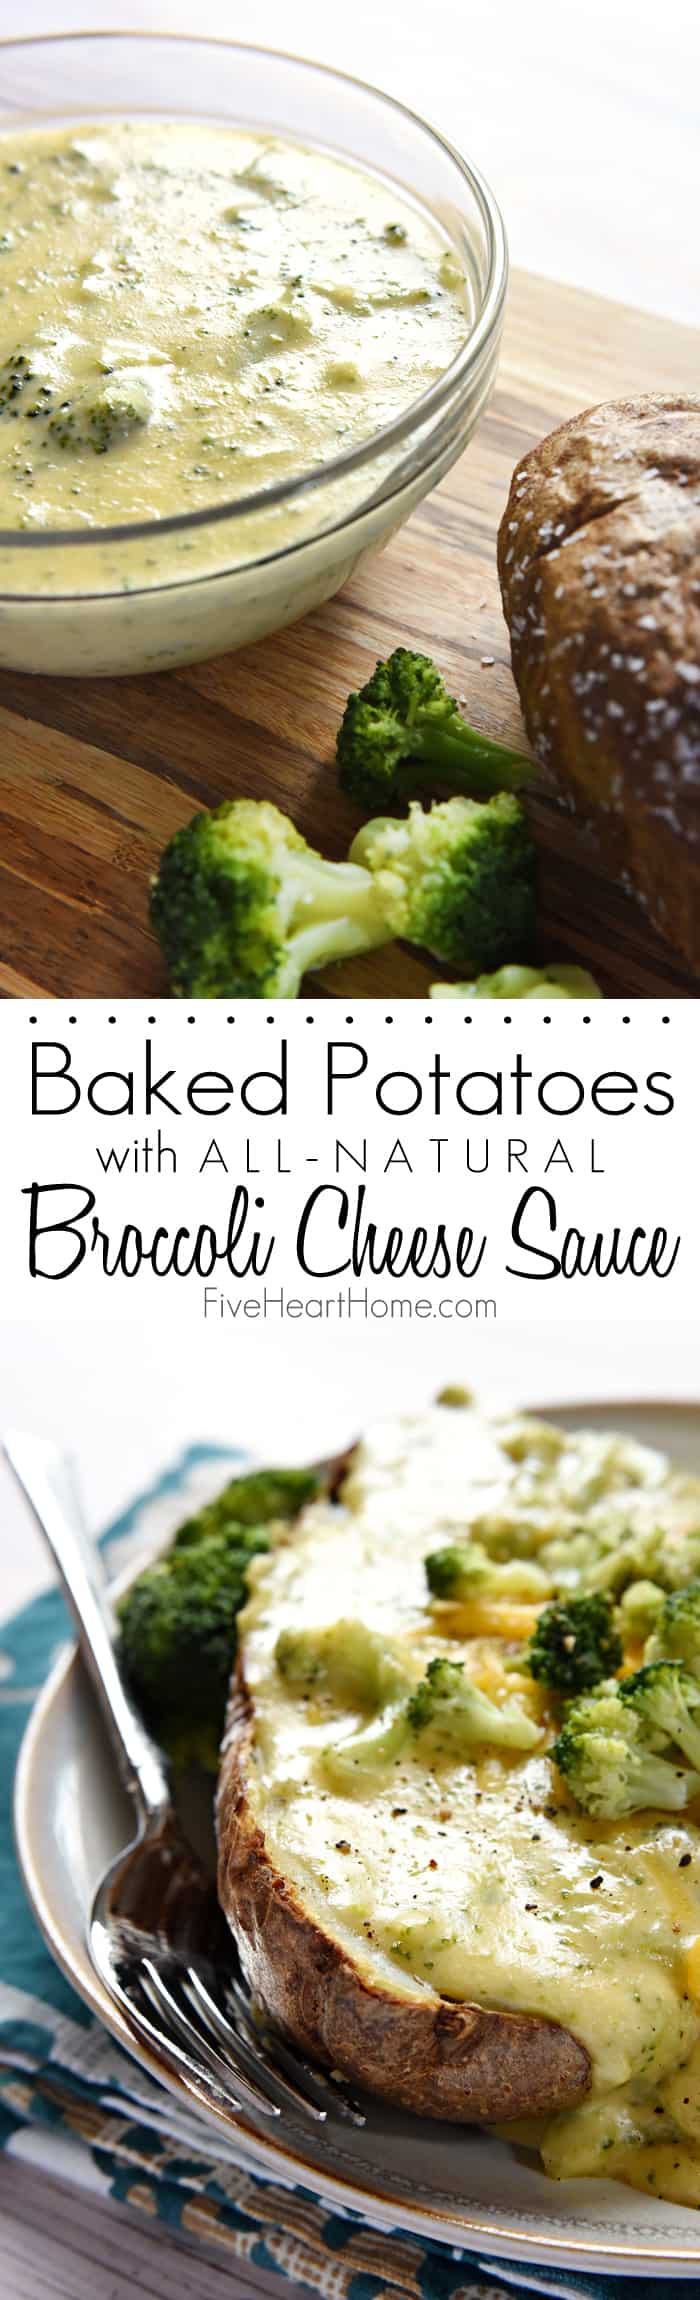 Broccoli Cheese Sauce for Baked Potatoes Collage with Text Overlay 